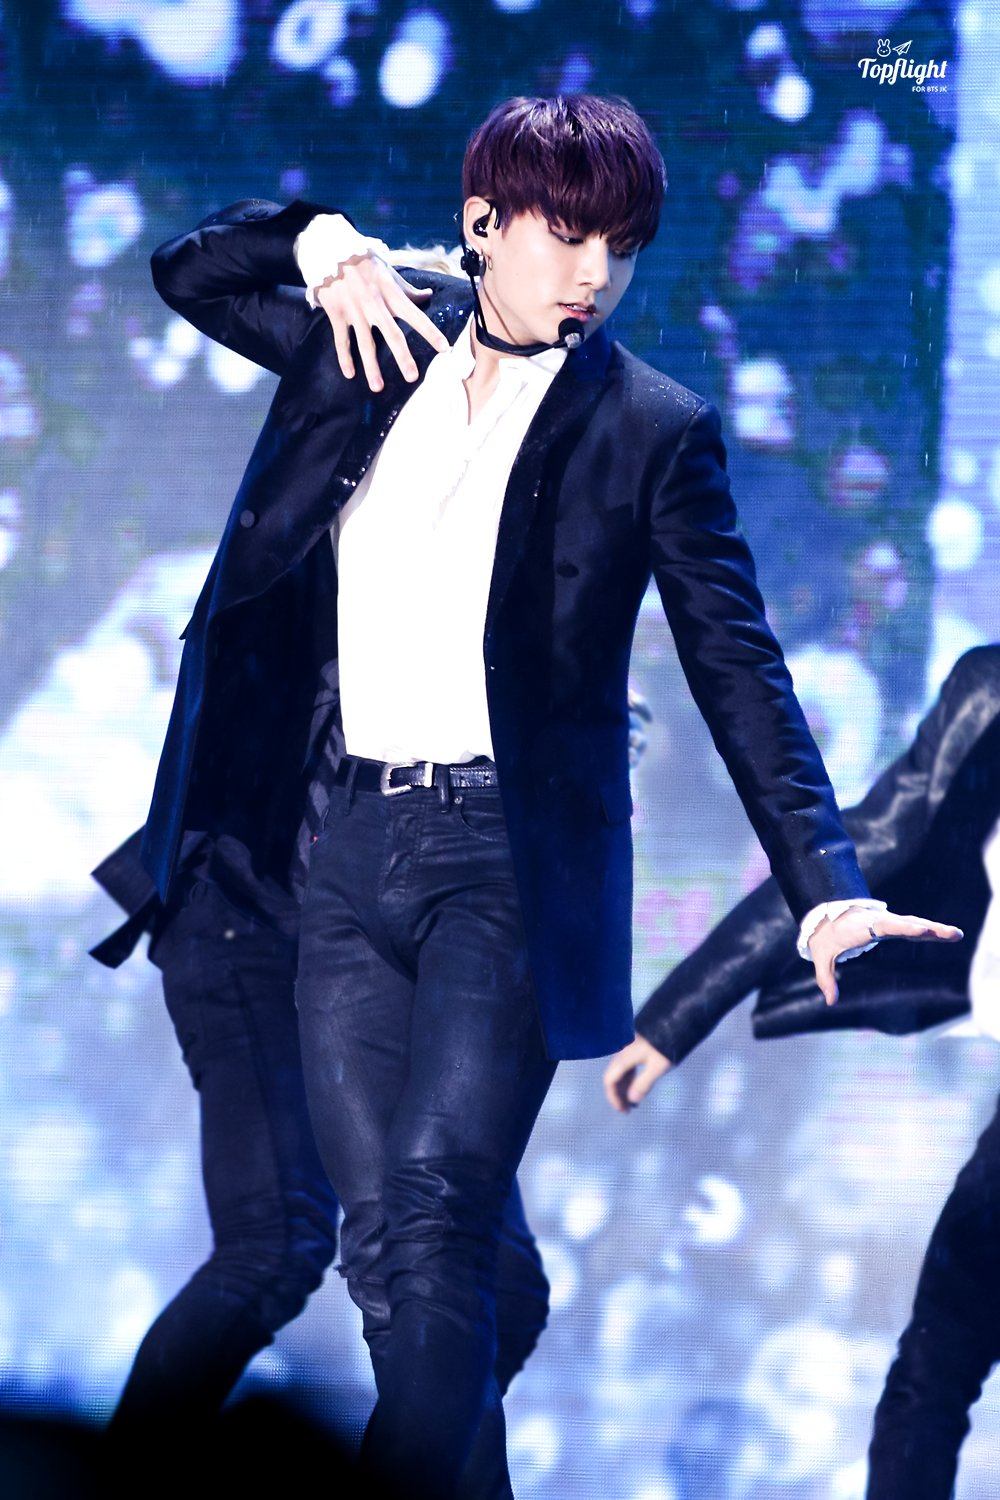 As a main dancer of BTS, Jungkook surely trains hard to get his perfect thighs. 